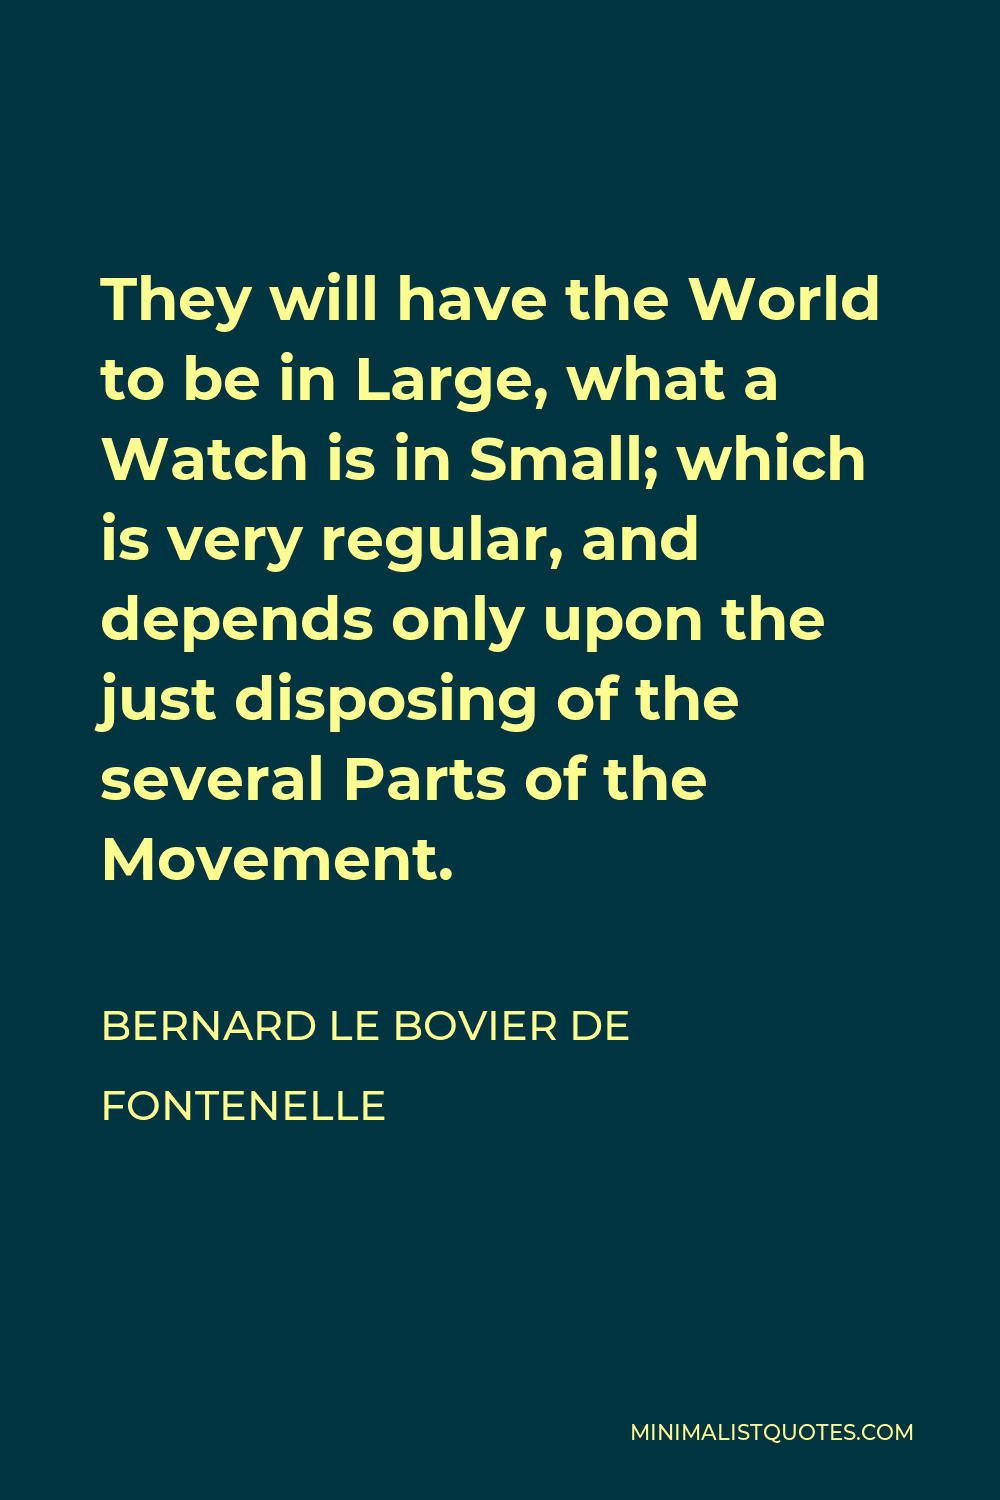 Bernard le Bovier de Fontenelle Quote - They will have the World to be in Large, what a Watch is in Small; which is very regular, and depends only upon the just disposing of the several Parts of the Movement.